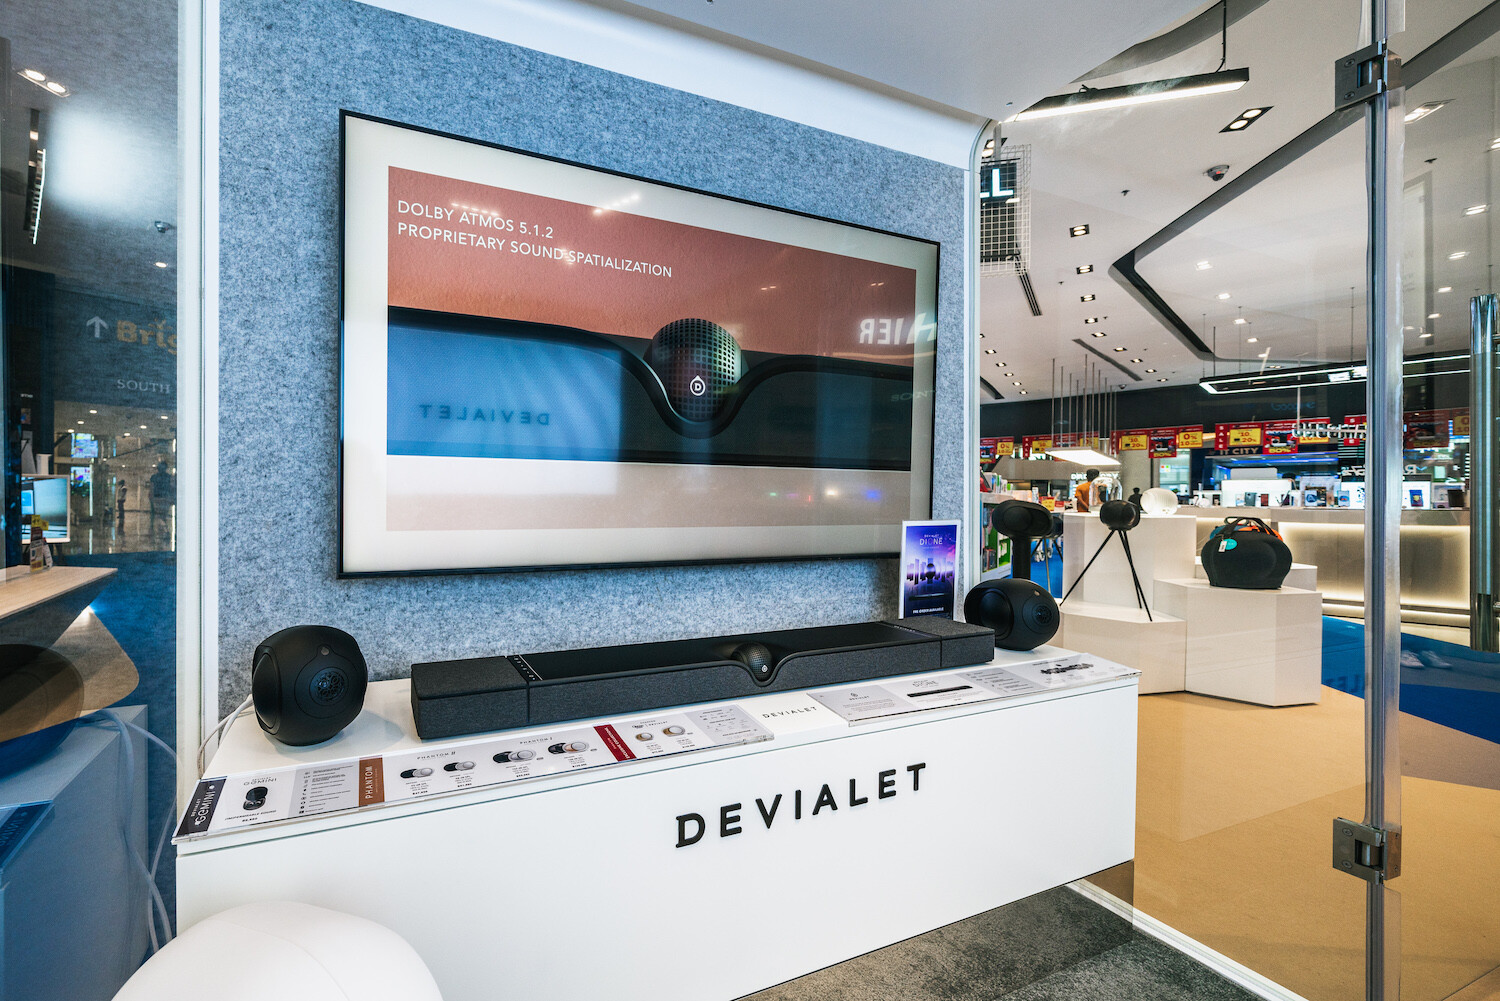 DECO 2000 introduces Devialet Dione high-end soundbar Expand your listening experience with the "cabin" audio room from France